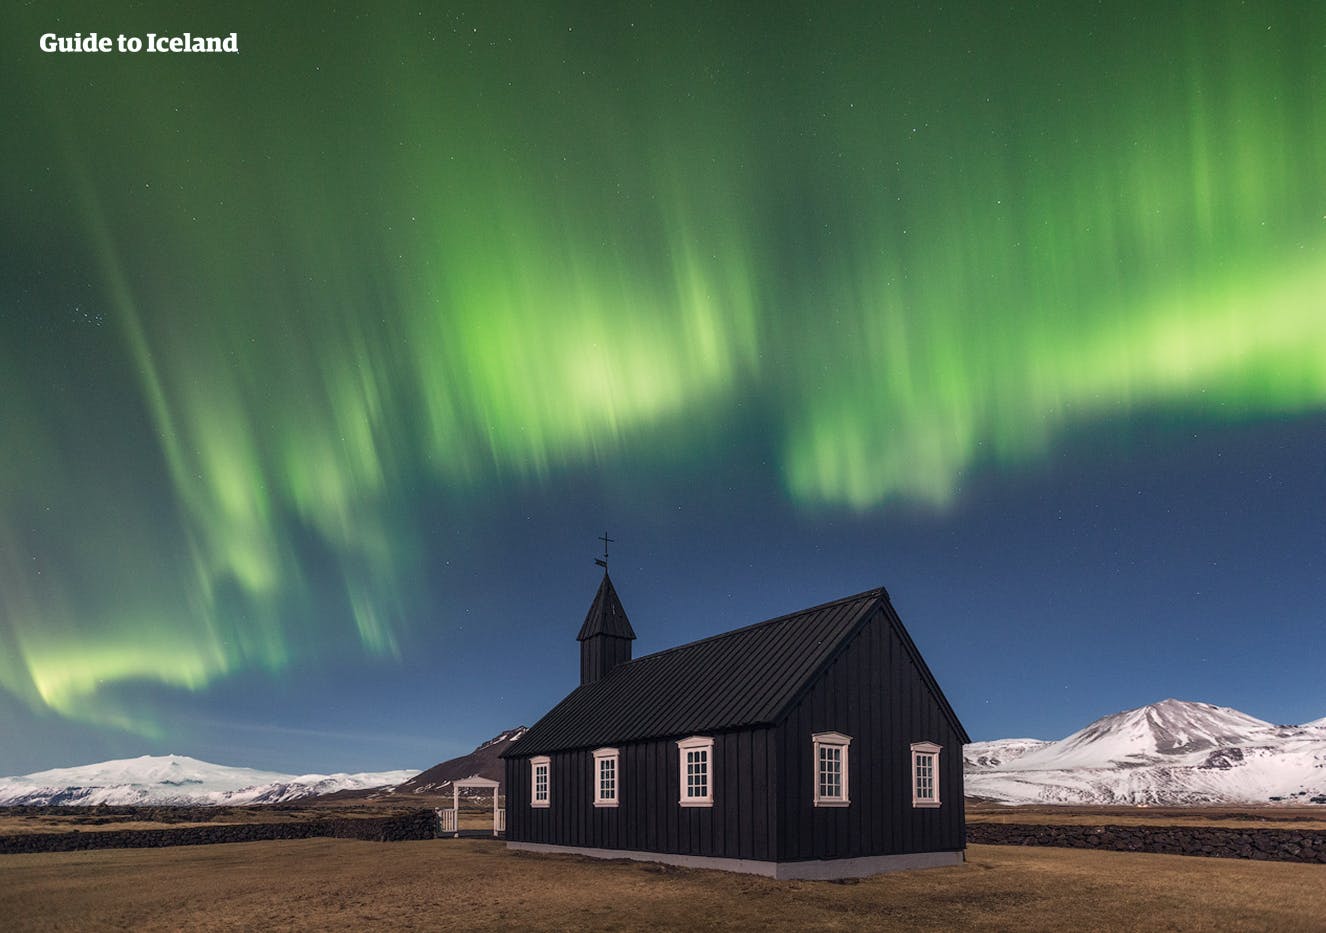 The sky over the black church at Búðir on the Snæfellsnes Peninsula painted in the green hues of the Northern Lights